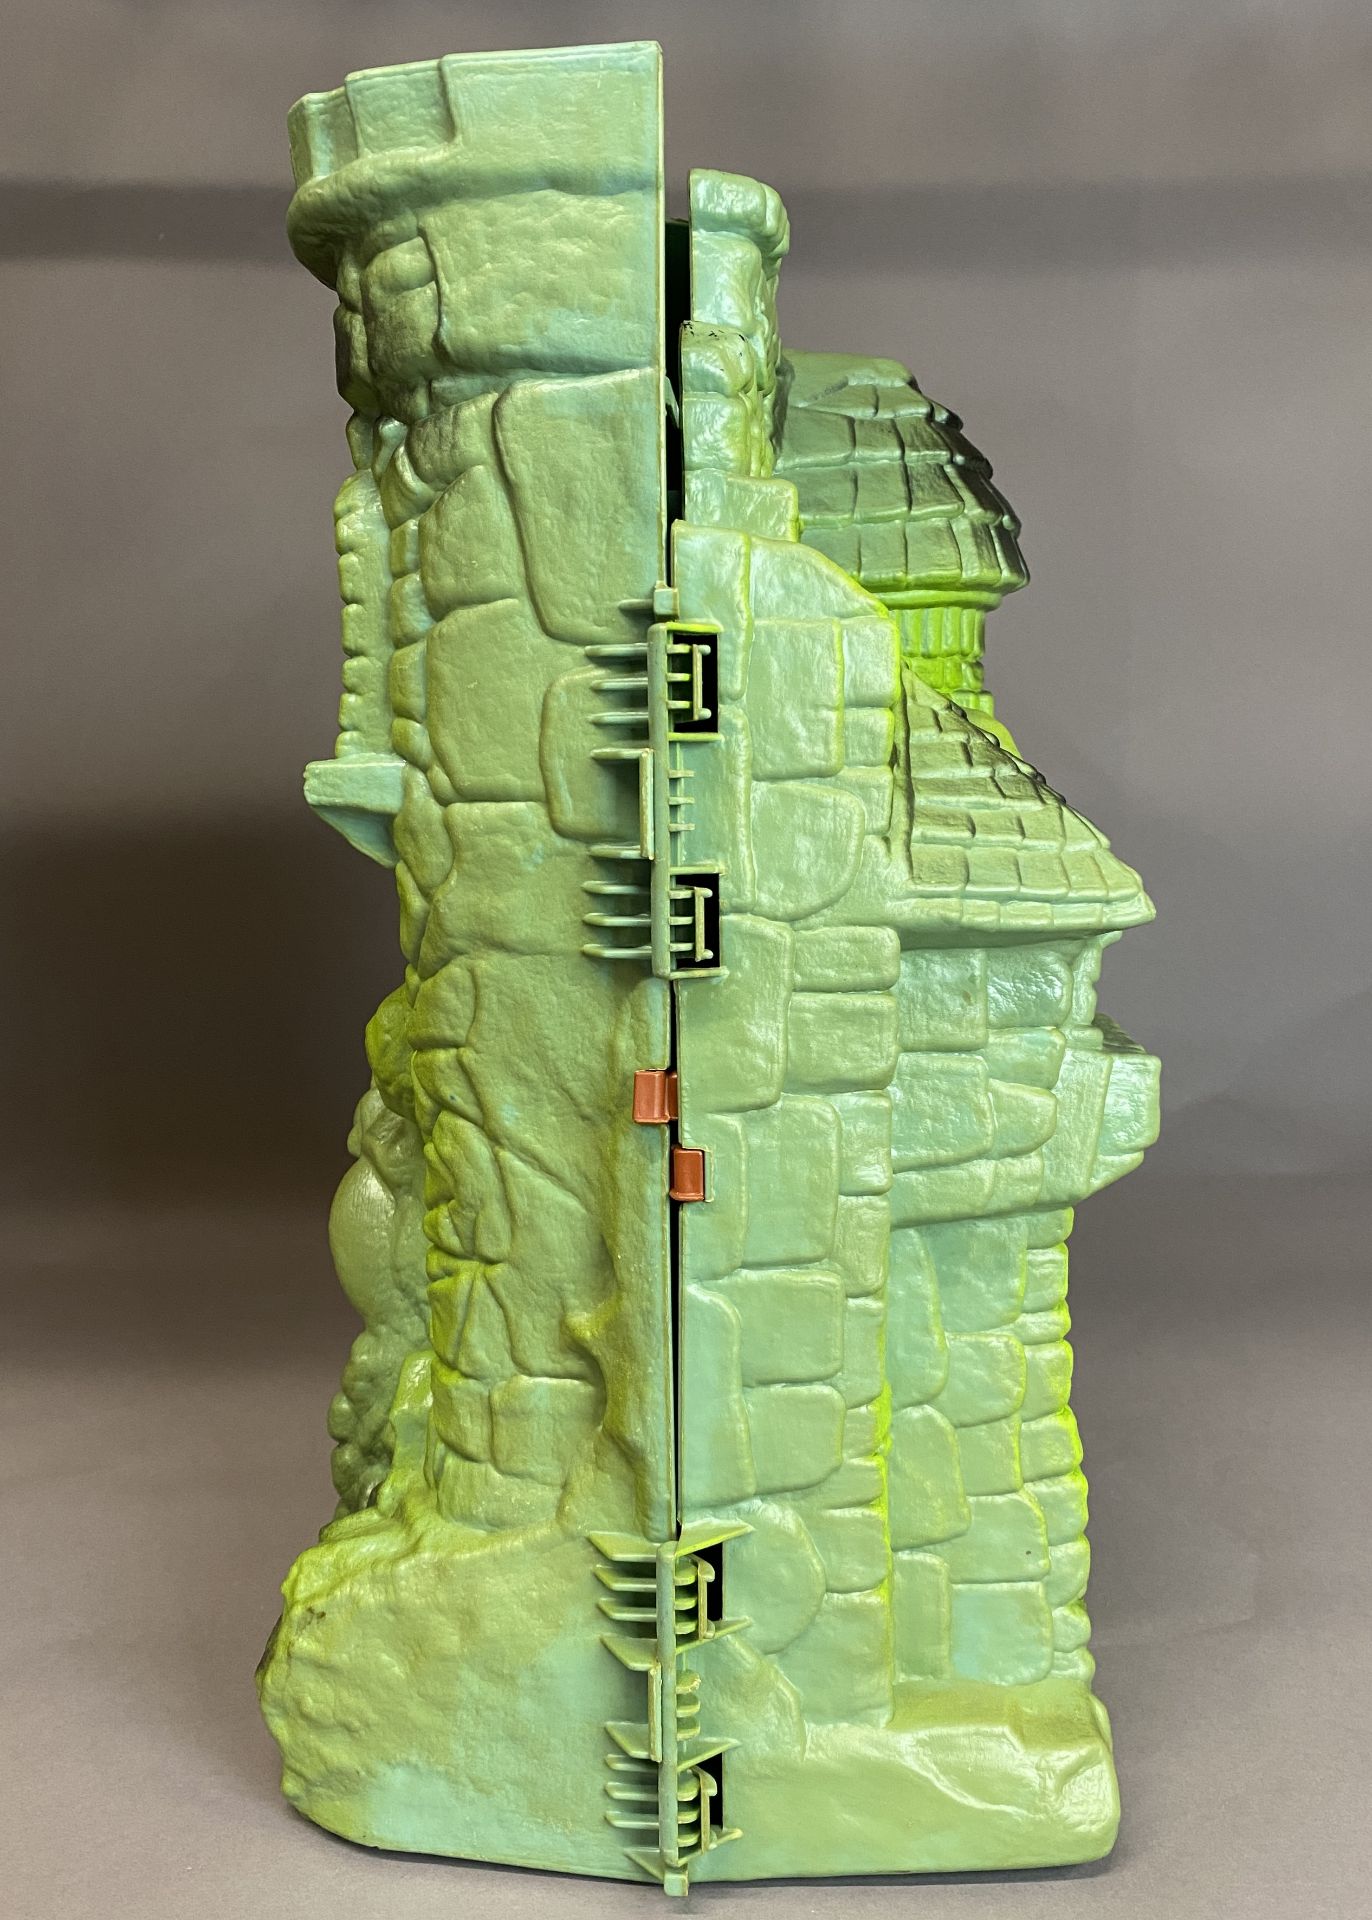 CASTLE GRAYSKULL - Vintage Masters of the Universe Playset (MOTU) - Complete with all accessories - Image 7 of 12